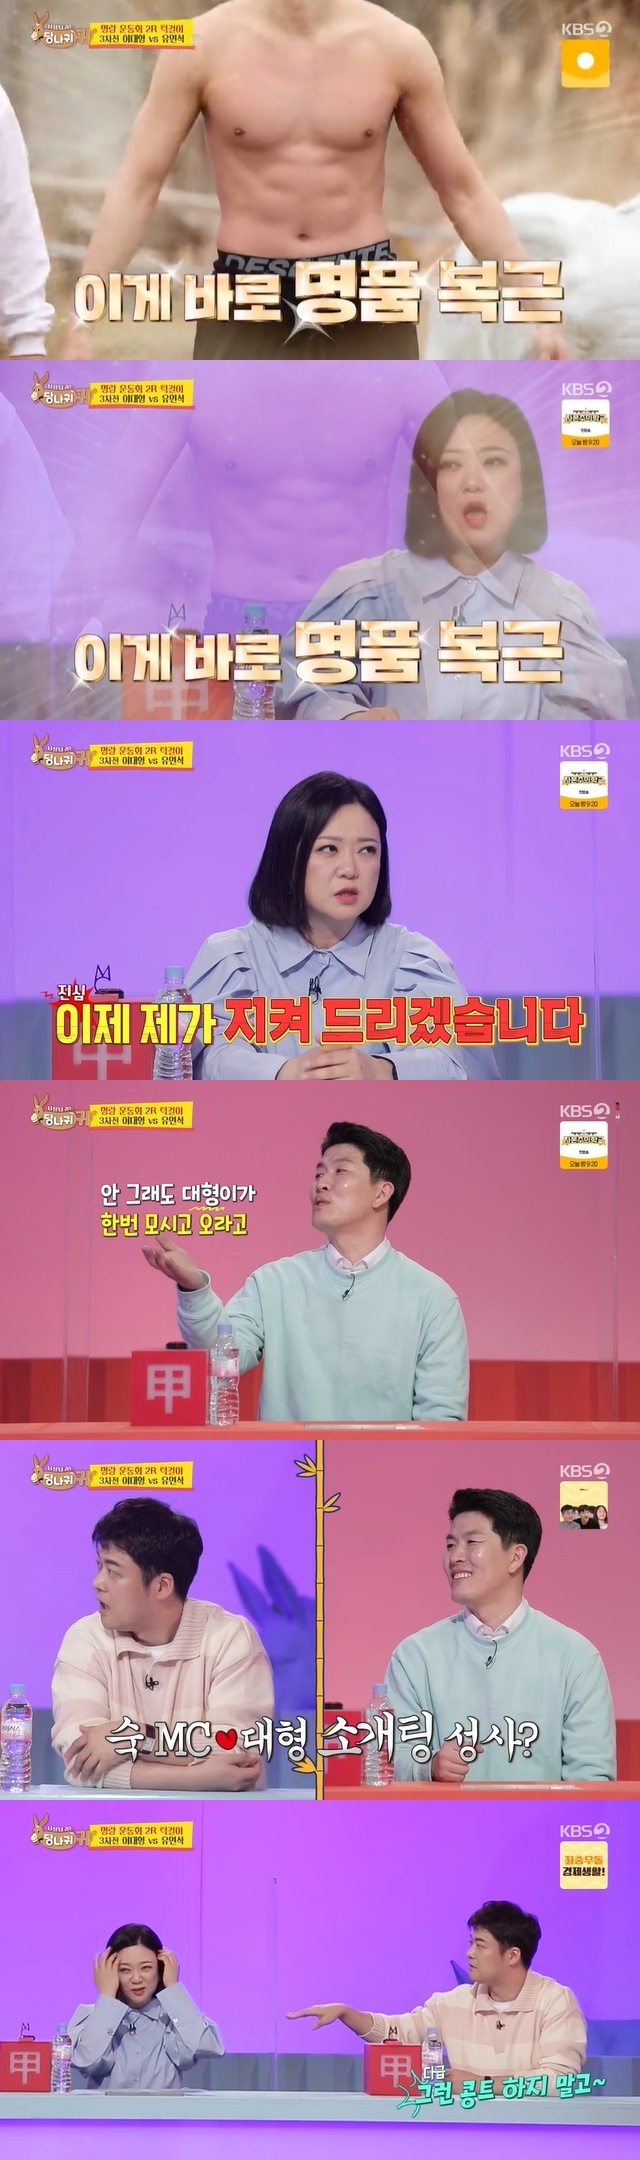 A pink air current ensued between Kim Sook and Lee Dae-hyung.In the 152th KBS 2TV entertainment Boss in the Mirror (hereinafter referred to as The Ass ear) broadcast on April 17, Kim Byung-hyun, who left the spring picnic with burger chefs and close athletic team seniors, was portrayed.Last week, Kim Byung-hyun teamed up with the Chefs athletic department to hold a high-quality athletic meet, which followed the queens dodgeball, which was a long-term stick.However, the athletic team was humiliated by a 2-1 defeat against the chefs.What was particularly disappointing was the fact that Lee Dae-hyung had lost.Lee Dae-hyung showed off his self-care with a perfectly managed luxury abs despite being 40 years old, but was defeated when he met and faced 27-year-old bodybuilder-turned-born chef Yoo Yeon-sik.Lee Dae-hyung lasted 54 seconds.Kim Sook, who watched Lee Dae-hyungs defeat, was greatly disappointed and worried, Why did you do that jaw-hanging, just hang on, you almost put yourself on your shoulder.Jun Hyun-moo, who was exposed to Kim Sooks rare self-interest, tongued out, saying, I can not really adapt.Kim Sook then complained that I have a bad shoulder in Lee Dae-hyungs excuse, saying, Everyone is good with my body and I am embarrassed, so I should dress quickly. I did that (peacock, human frame) even though my shoulder hurts.Then he declared, Now Ill protect you.Kim Byung-hyun invited Kim Sook to come to the burger house, come to the burger house, come to the burger house. Jun Hyun-moo said, Is it polite?I want to know what kind of person I am. Kim Byung-hyun laughed and replied, Yes. In this atmosphere, Kim Sook cleaned up the head of the main island and wiped the saliva at the mouth overly. Jun Hyun-moo said, Sister, it is not a time to play.It can be steamy, dont do that, he hurriedly said.Kim Sook said, I can look at it, so I want to be pretty. He said, This sister is too weak for this side.Lee Dae-hyung was born in 1983 and is 40 years old in Korea. Kim Sook was born in 1975 and 48 years old in Korea.It is noteworthy whether the blind date of the two people will overcome the age difference of 8 years old and be concluded.